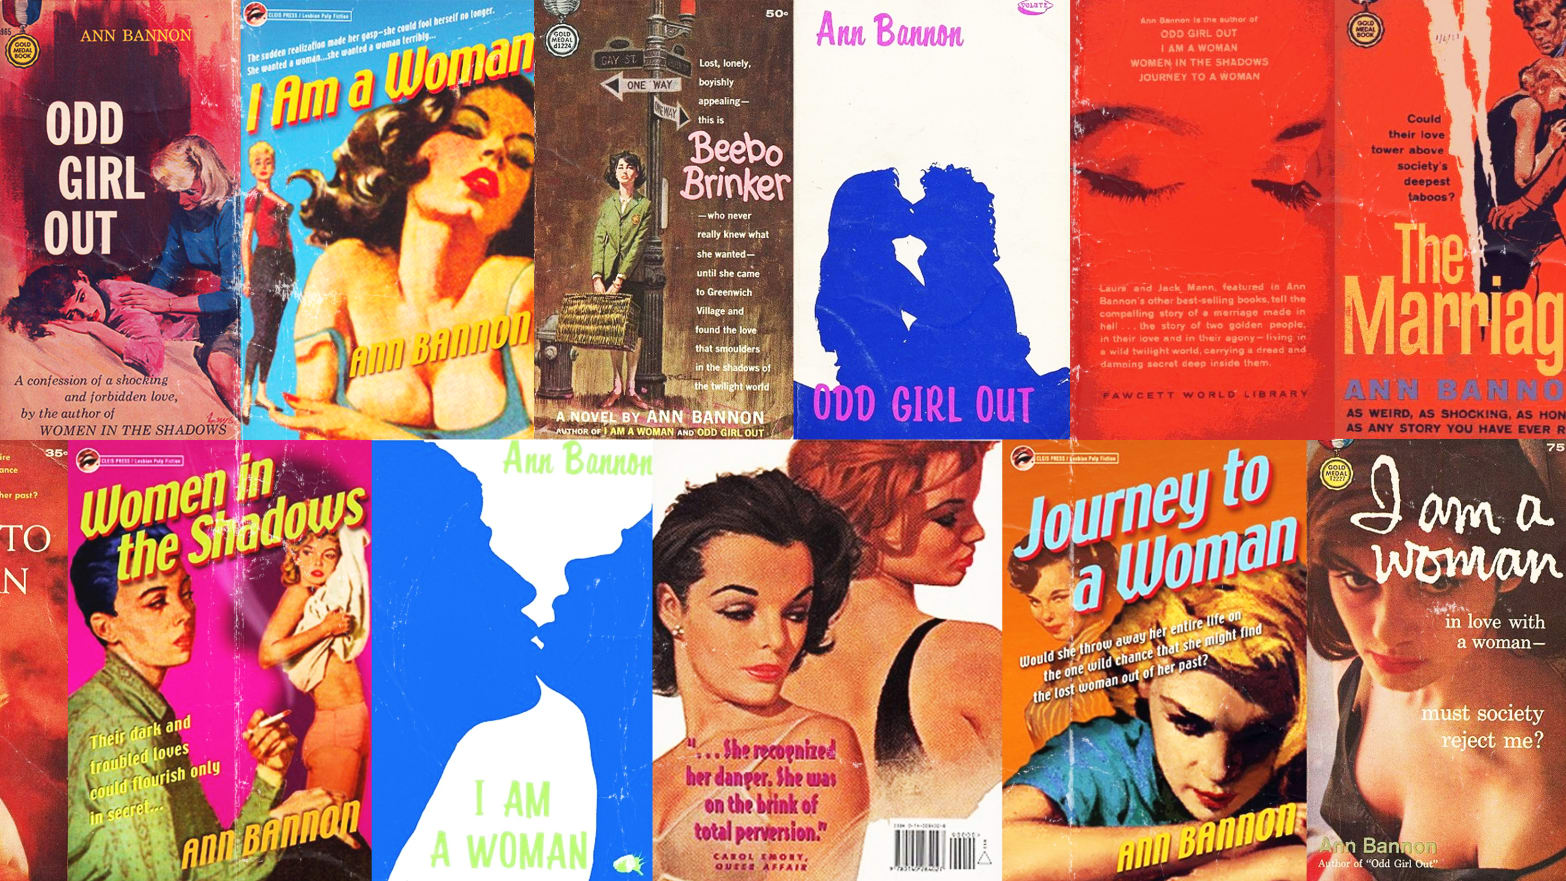 Ann Bannon, the Queen of Lesbian Pulp Fiction, Reveals Her Own Amazing Story image pic